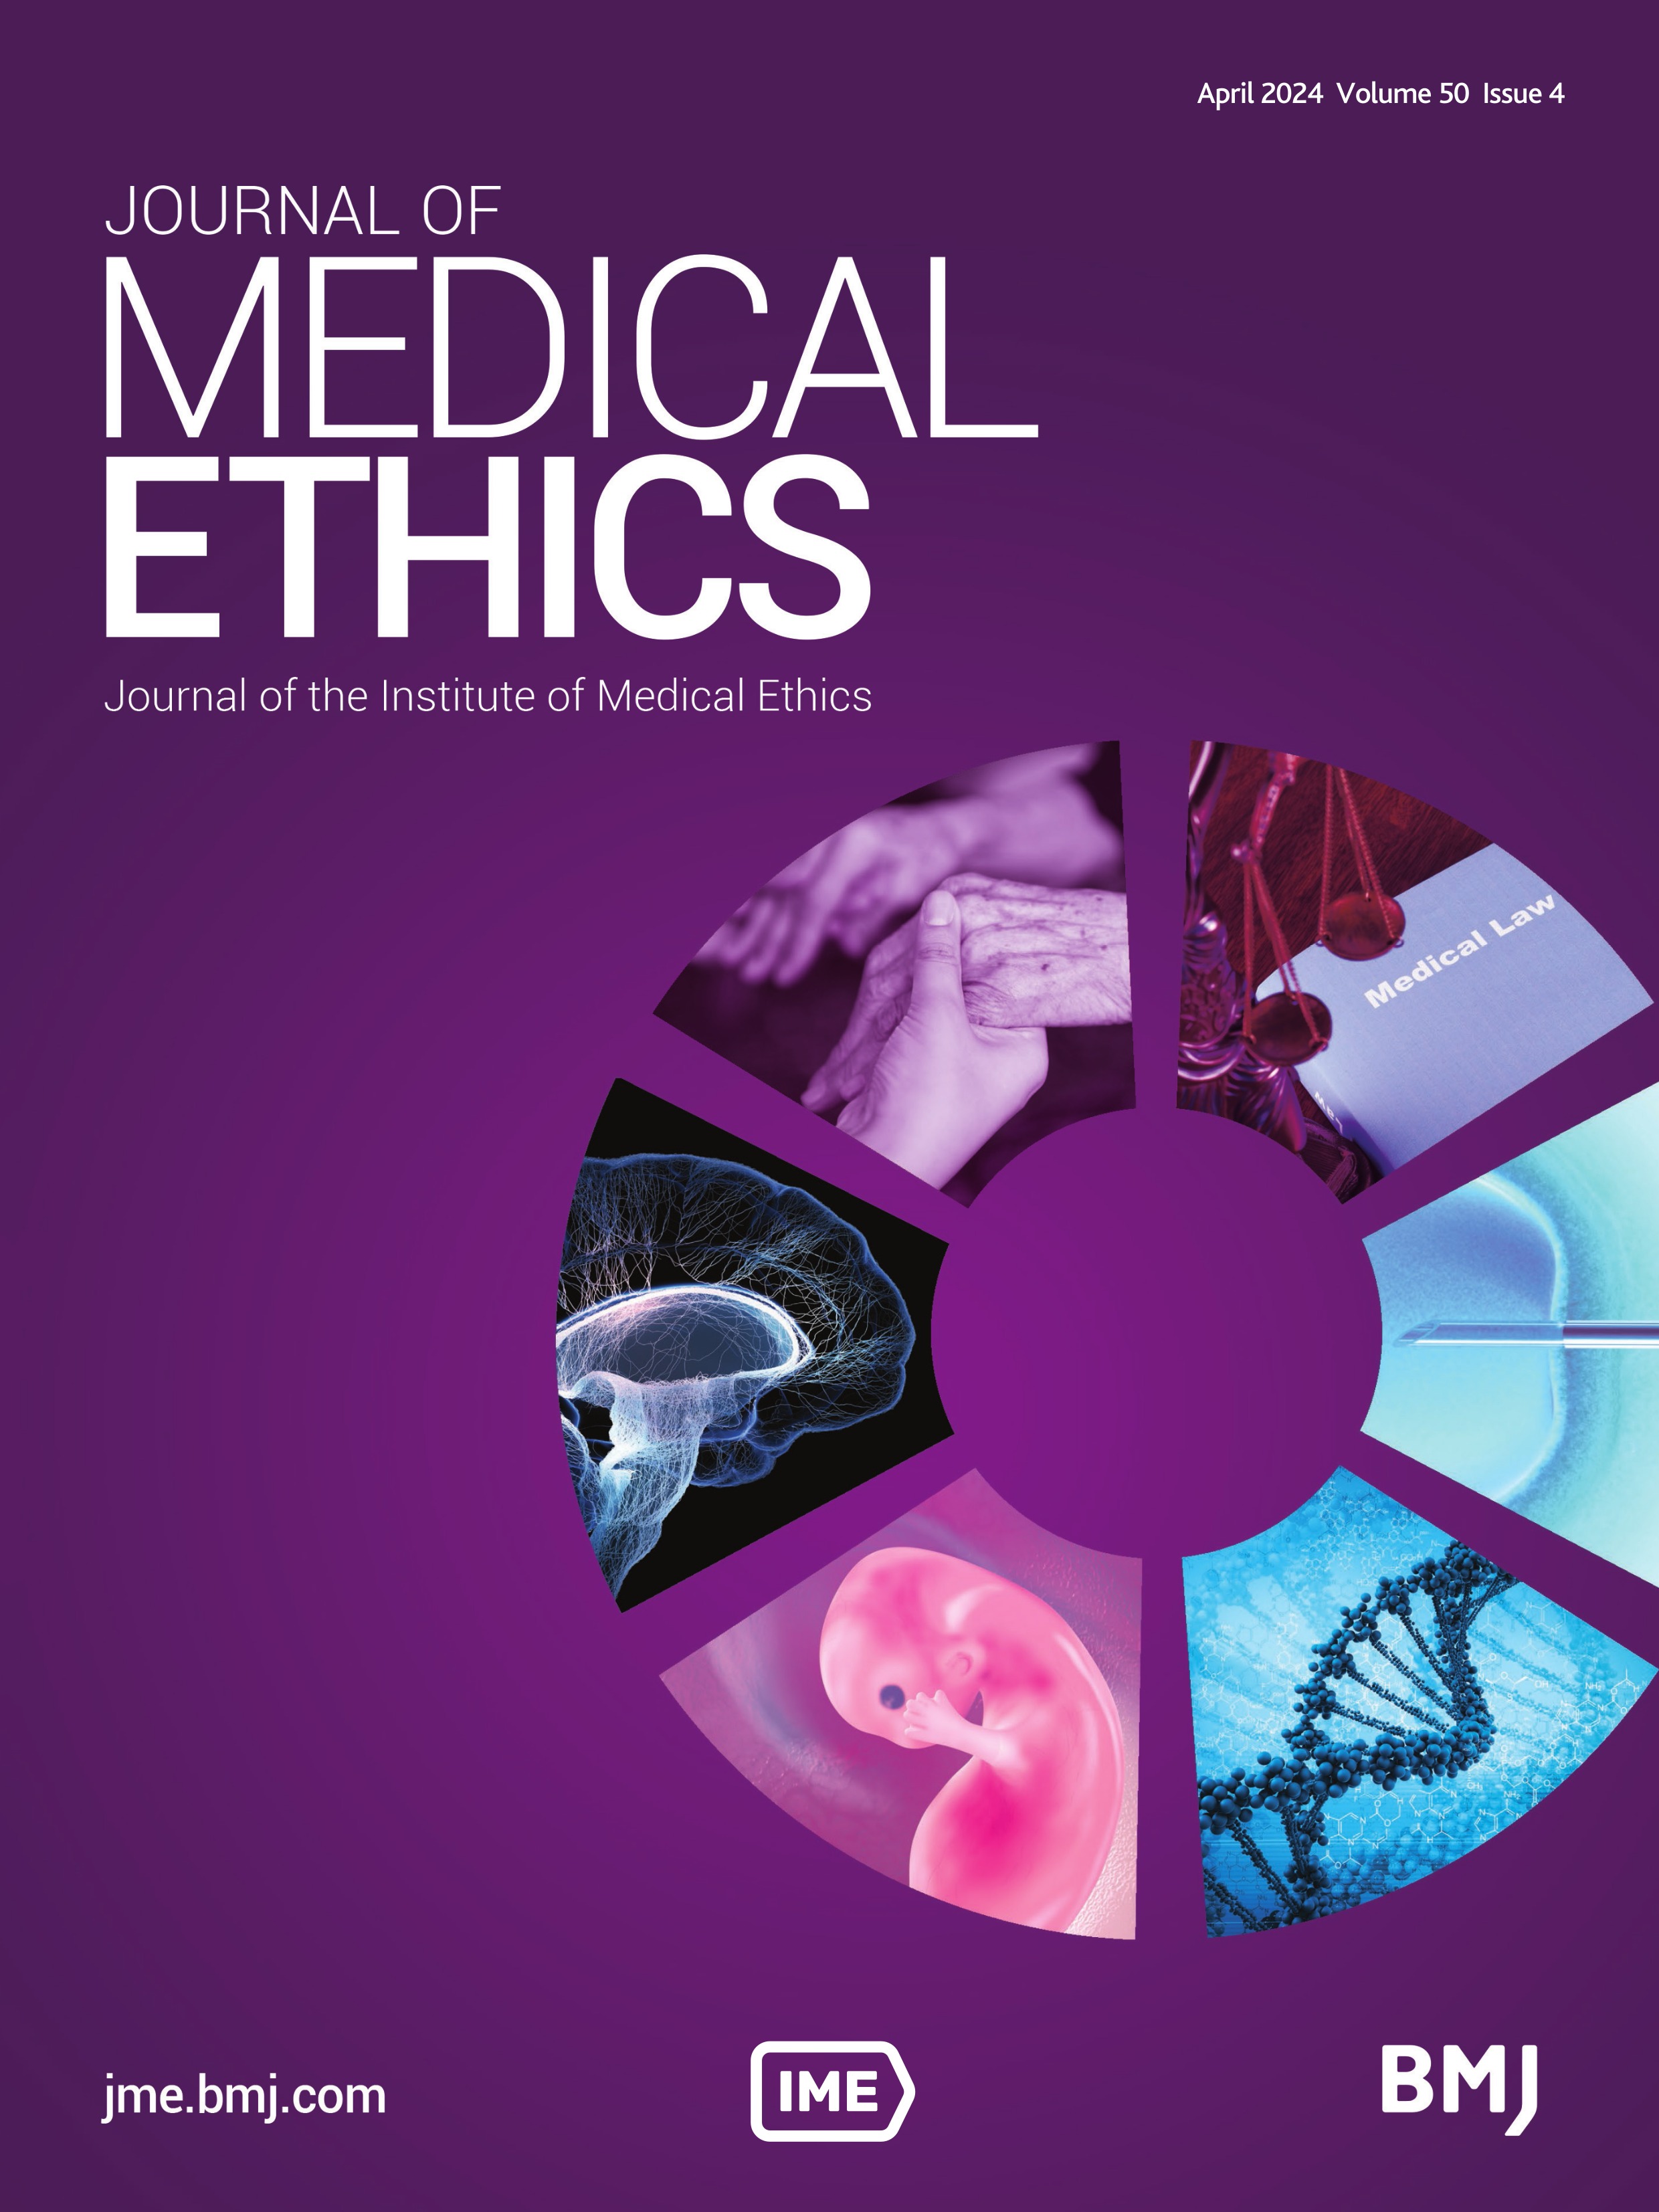 Research ethics and public trust in vaccines: the case of COVID-19 challenge trials